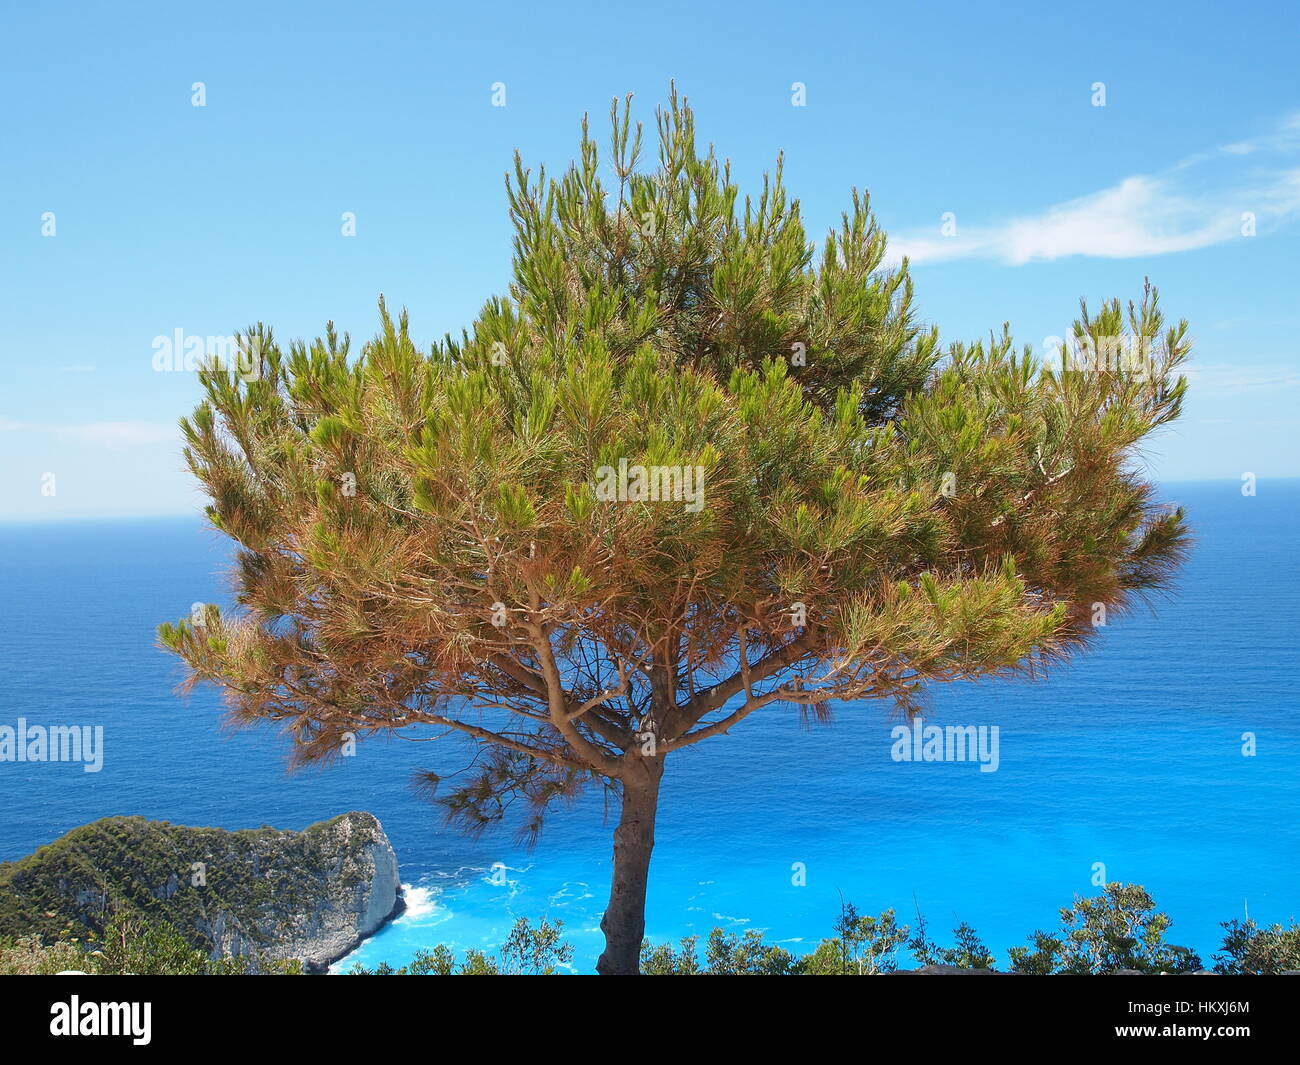 Pine tree is evergreen, coniferous resinous tree. The bark of most pines is thick and scaly, but some species have thin, flaky bark. Stock Photo